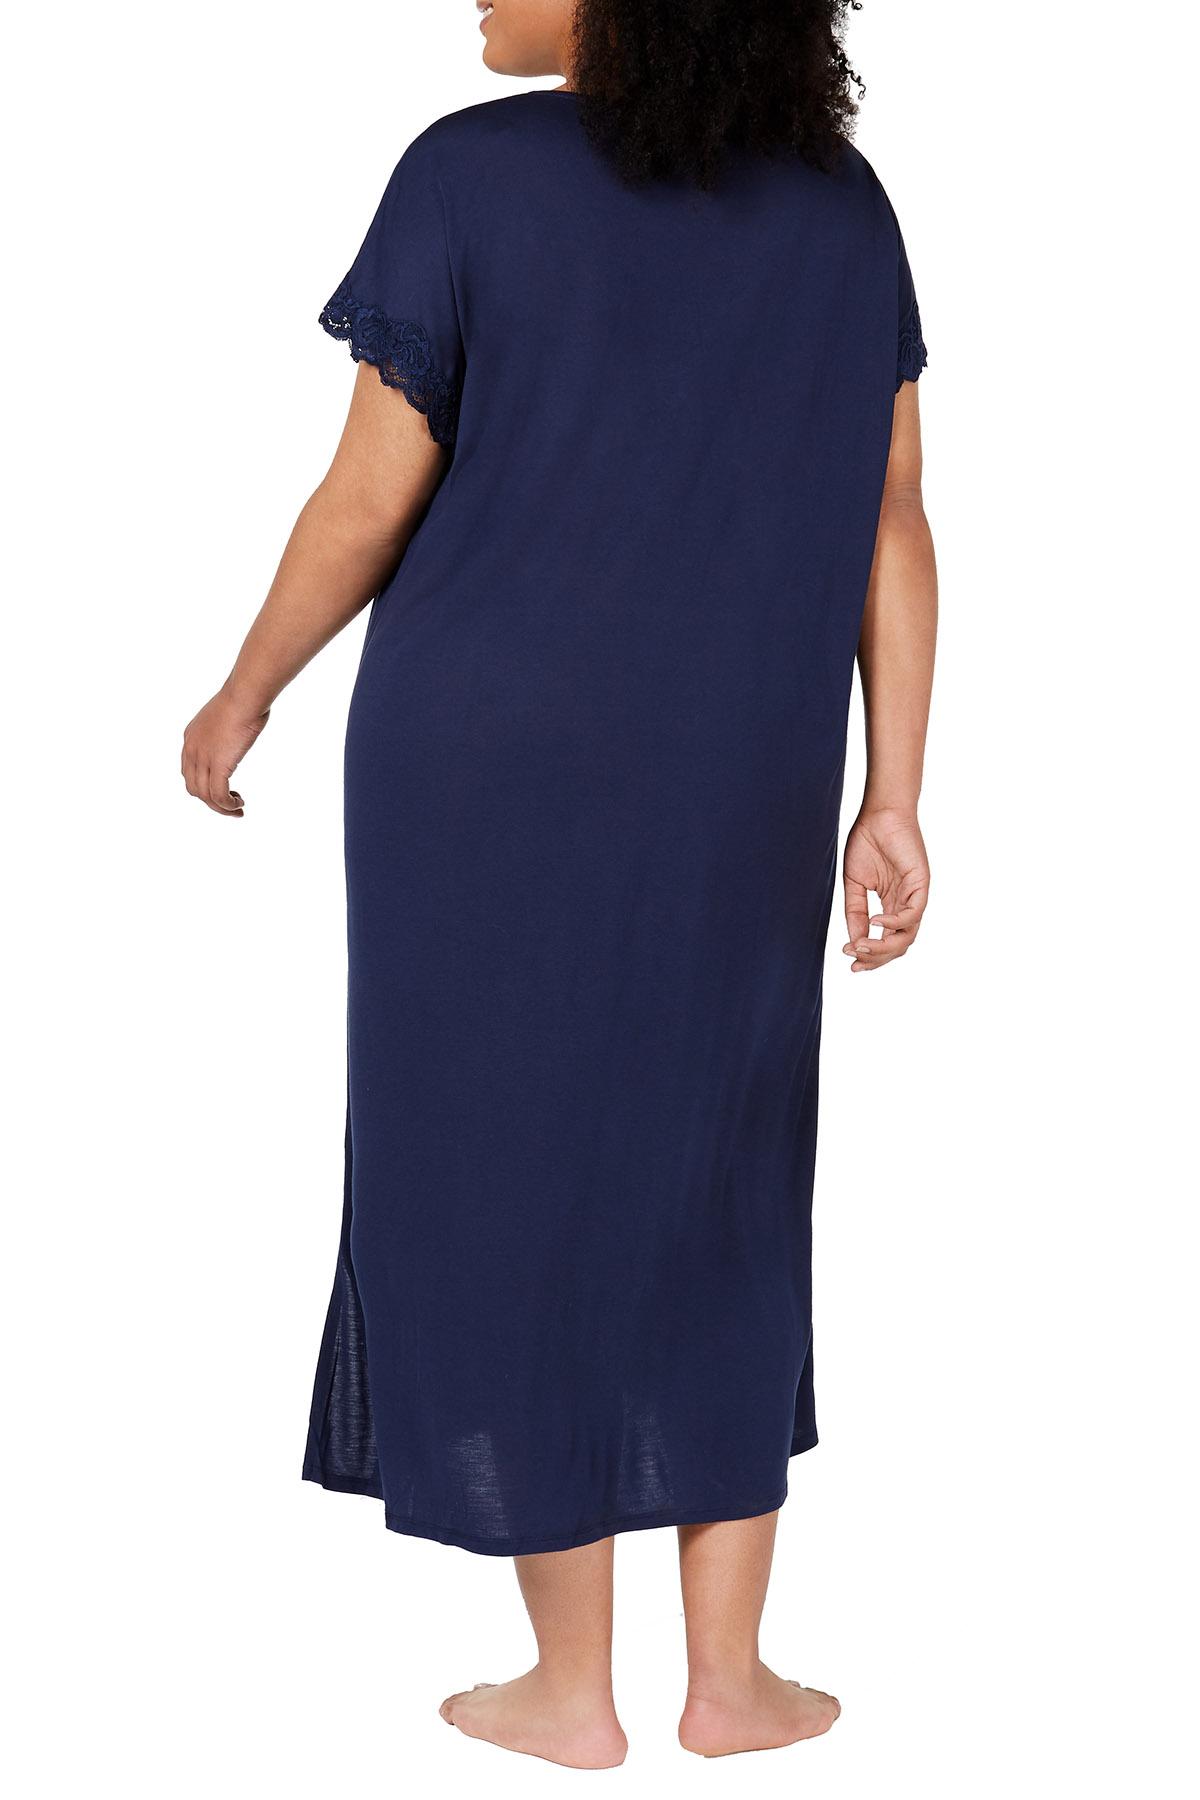 Charter Club Intimates PLUS Ink Blue Lace Trim Soft Knit Modal Nightgown